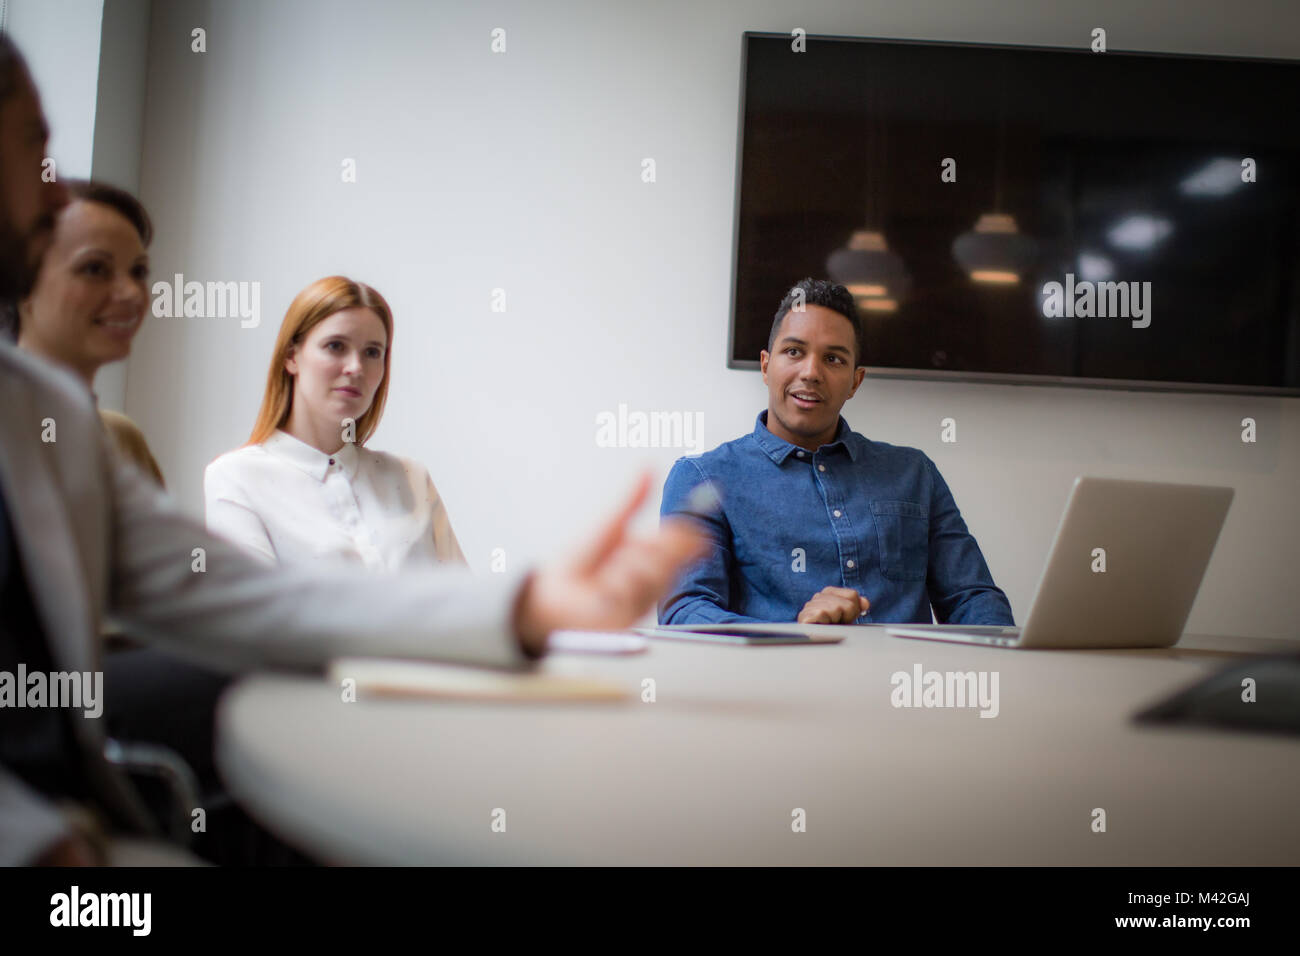 Colleagues having a discussion in a business meeting Stock Photo